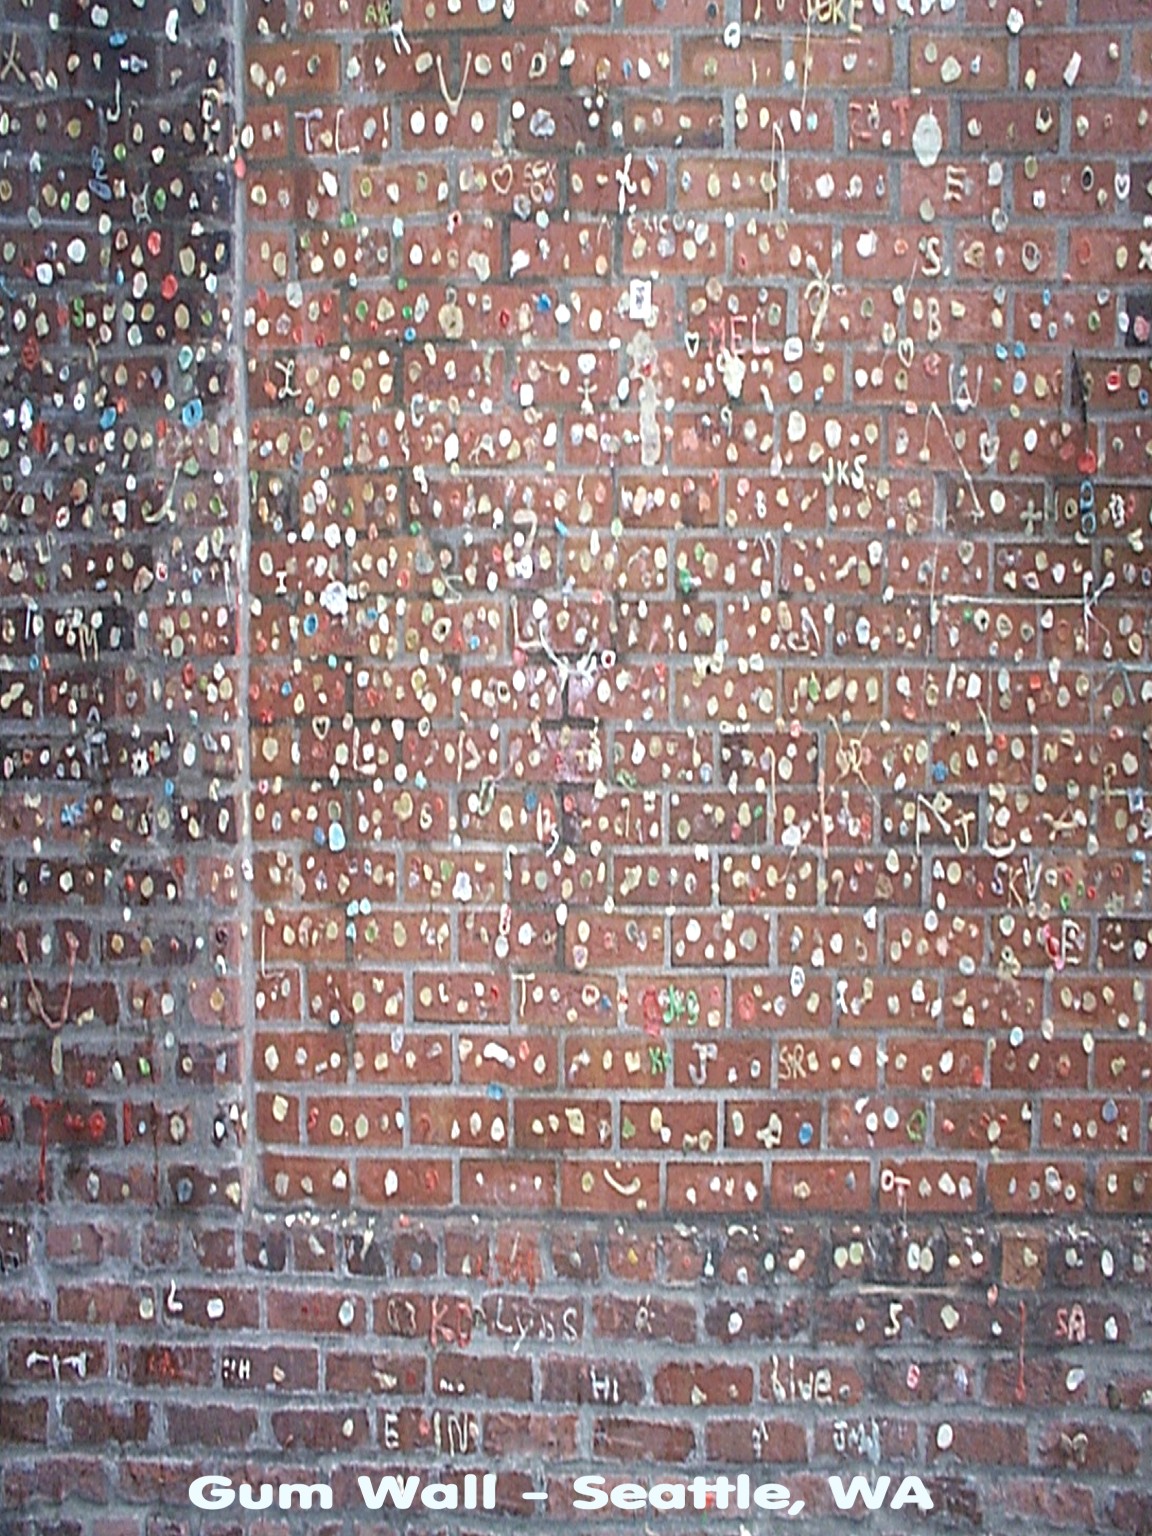 The Famous Gum Wall